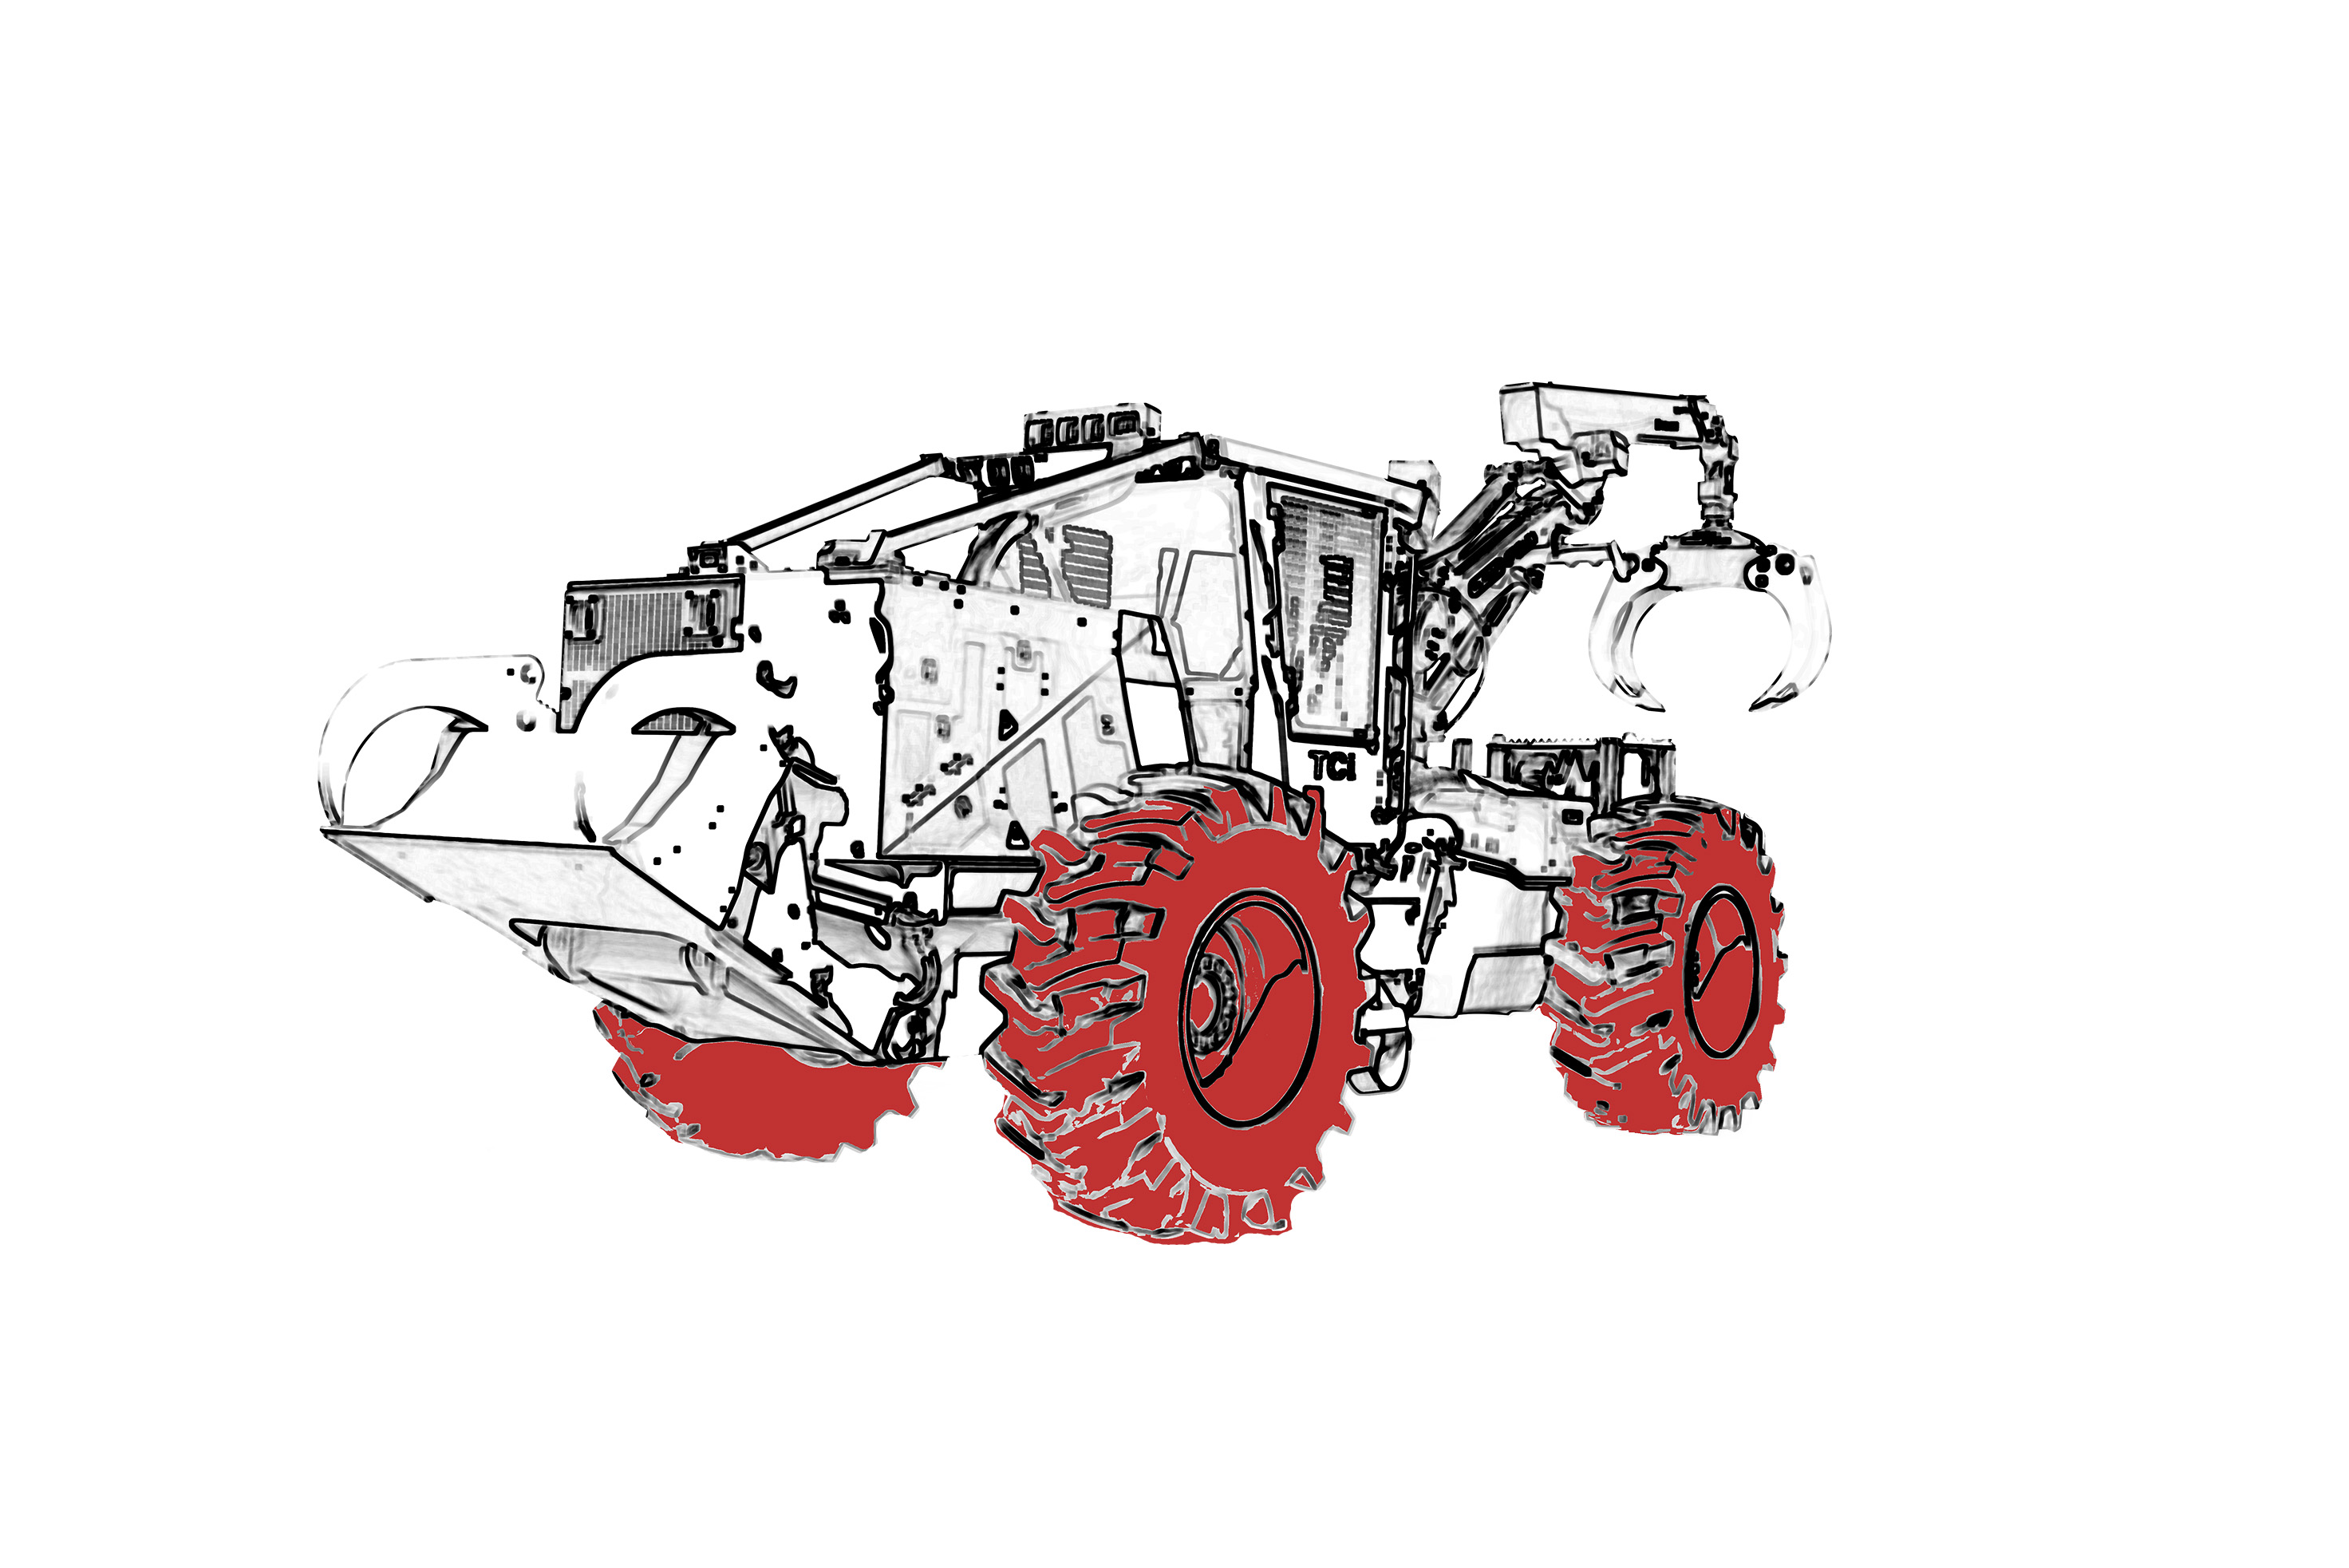 Groupe motopropulseur Skidder TCi 612 | Cuoq Forest Diffusion